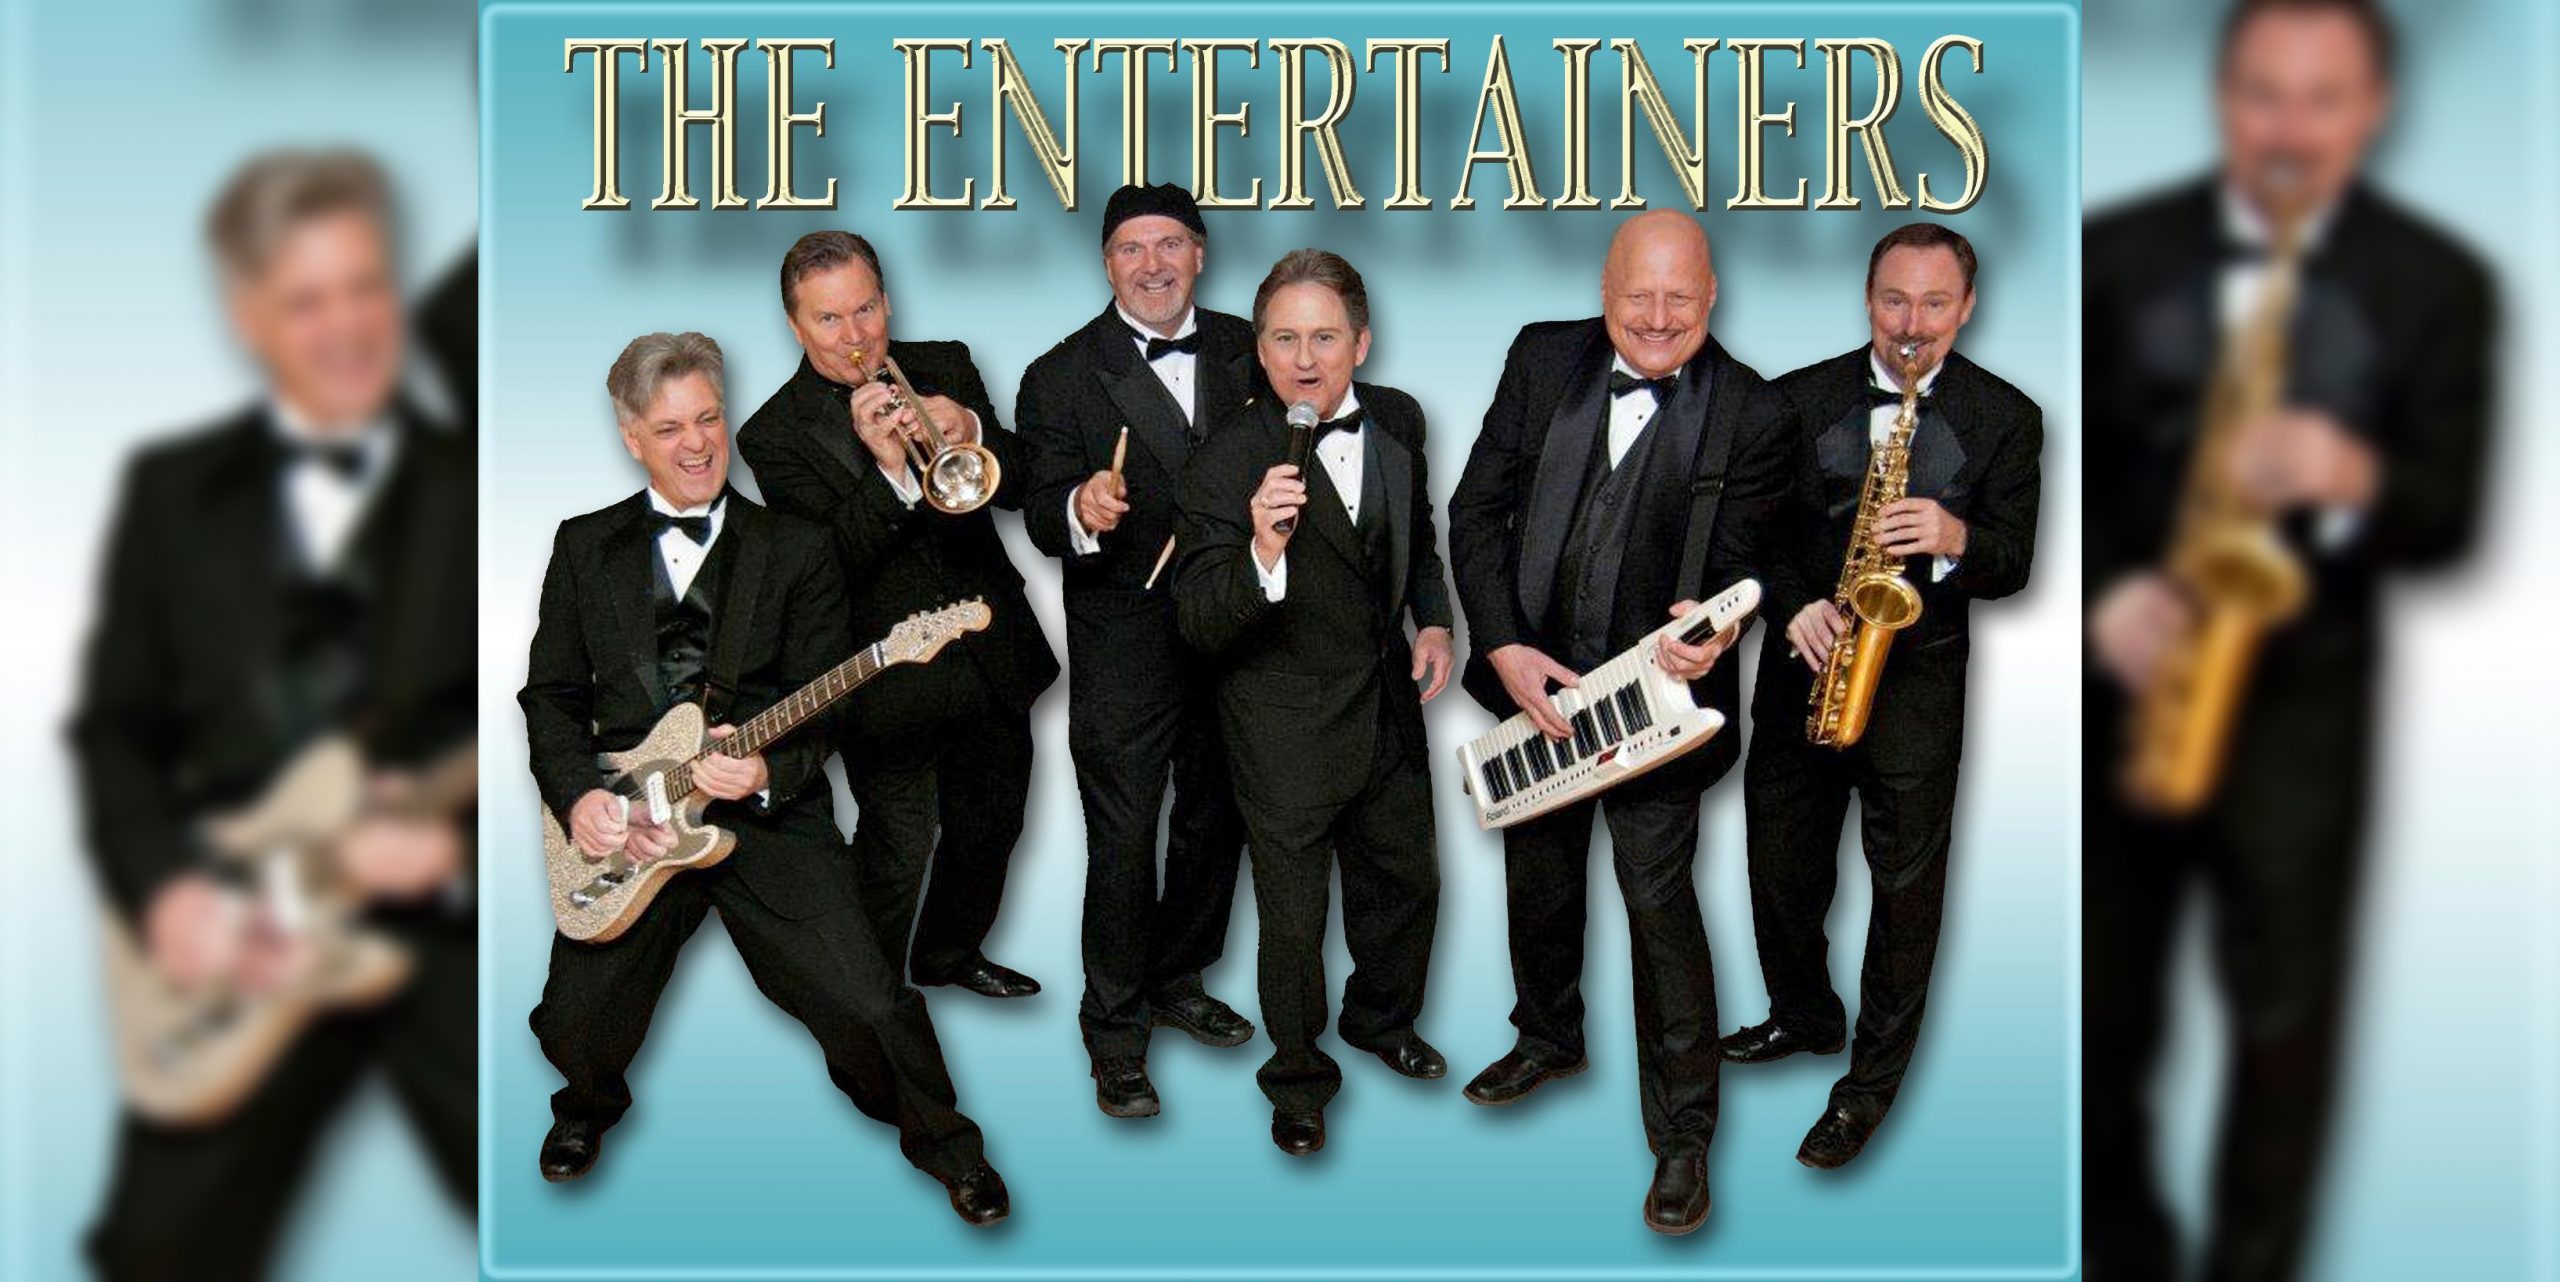 The Entertainers Key Signature Entertainment